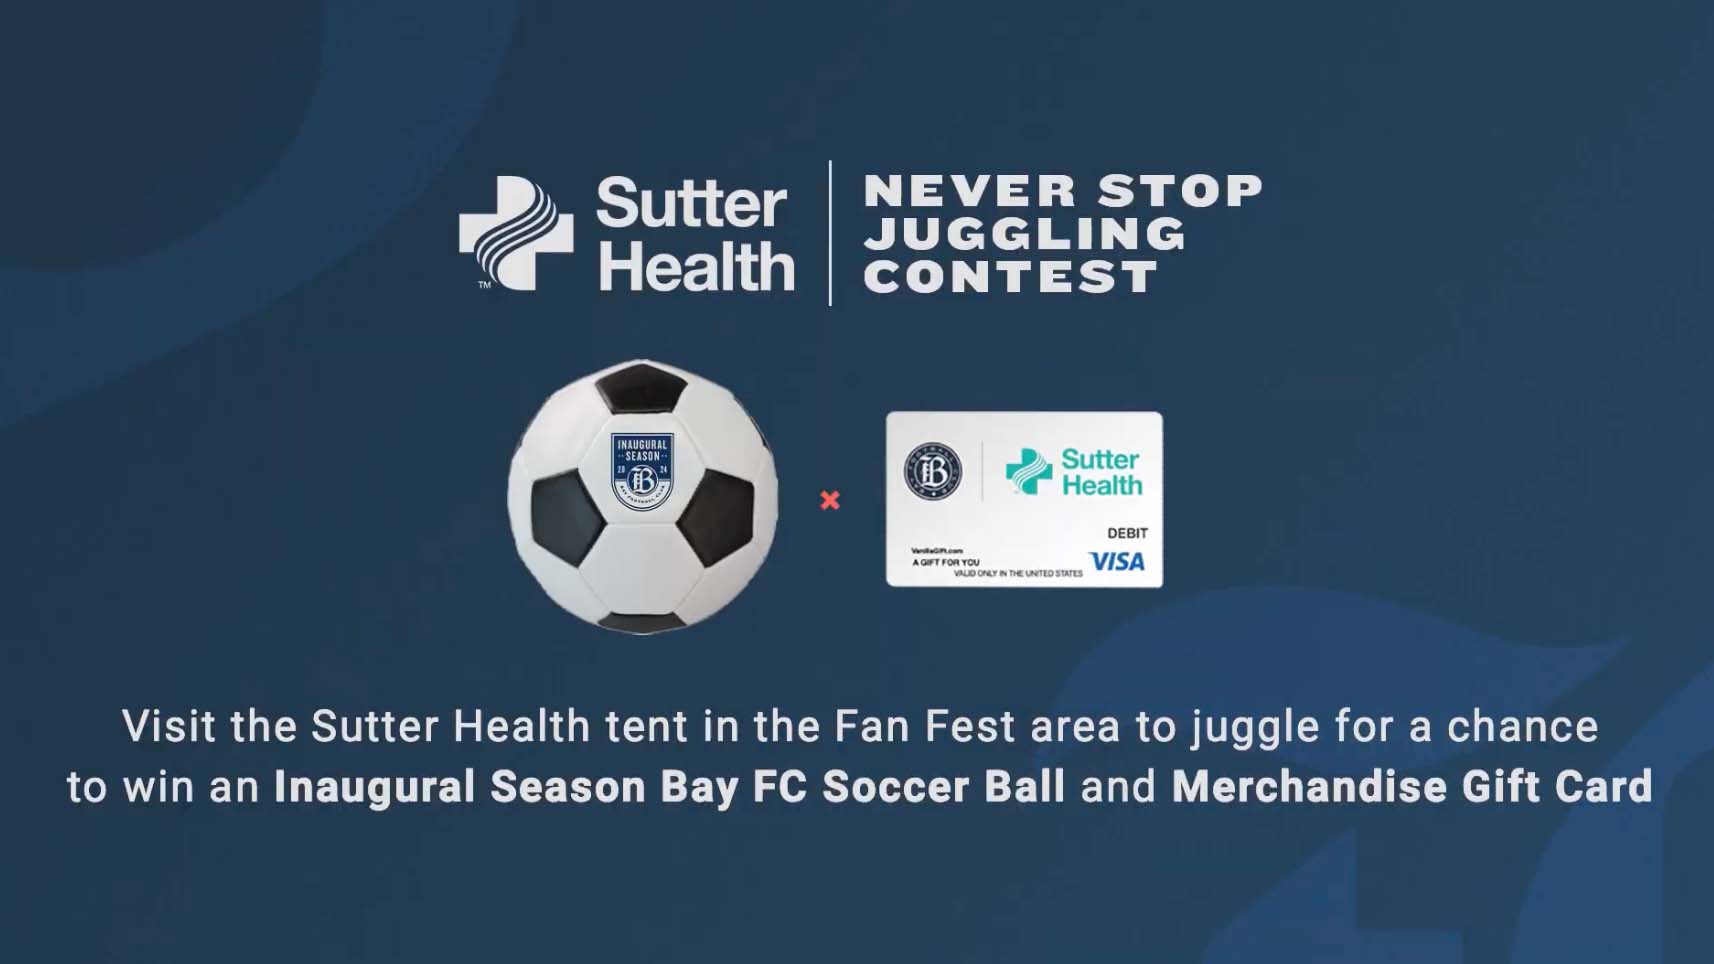 Visit the Sutter Health tent in the Fan Fest area to juggle for a chance to win an Inaugural Season Bay FC Soccer Ball and Merchandise Gift Card